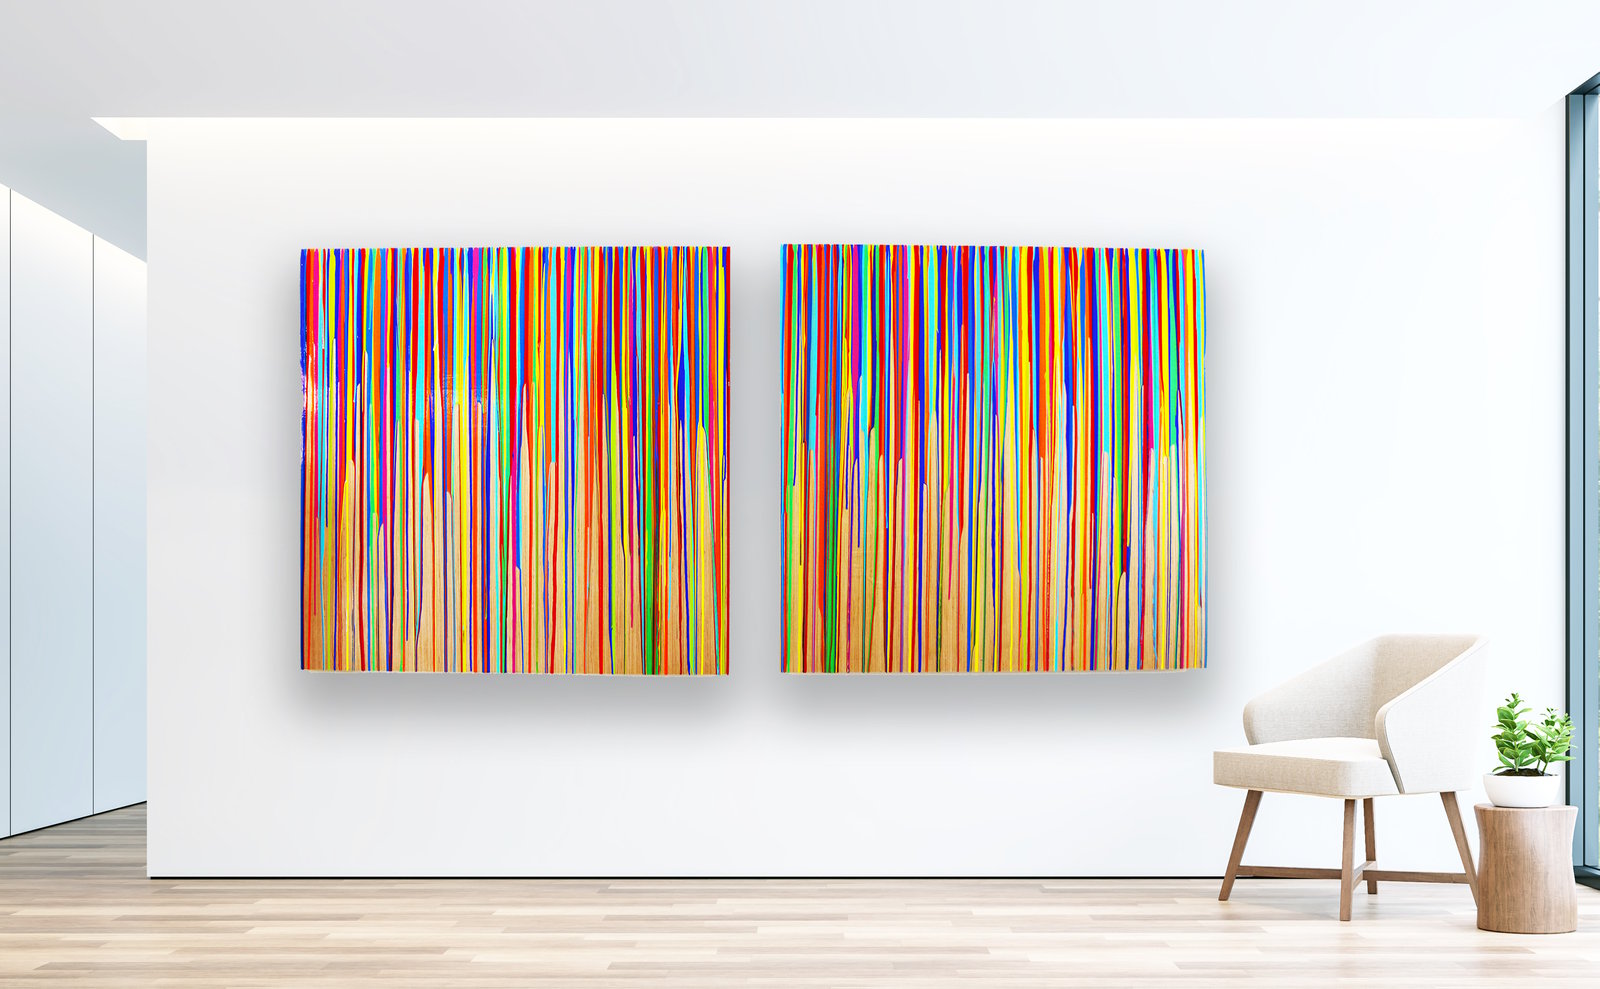 Abstract　Modern　Art　Colorful　Drip　Art　on　Painting　to　NOW　Rosemary　Large　Painting　Painting　Wood　READY　Wall　SHIP　Pierce